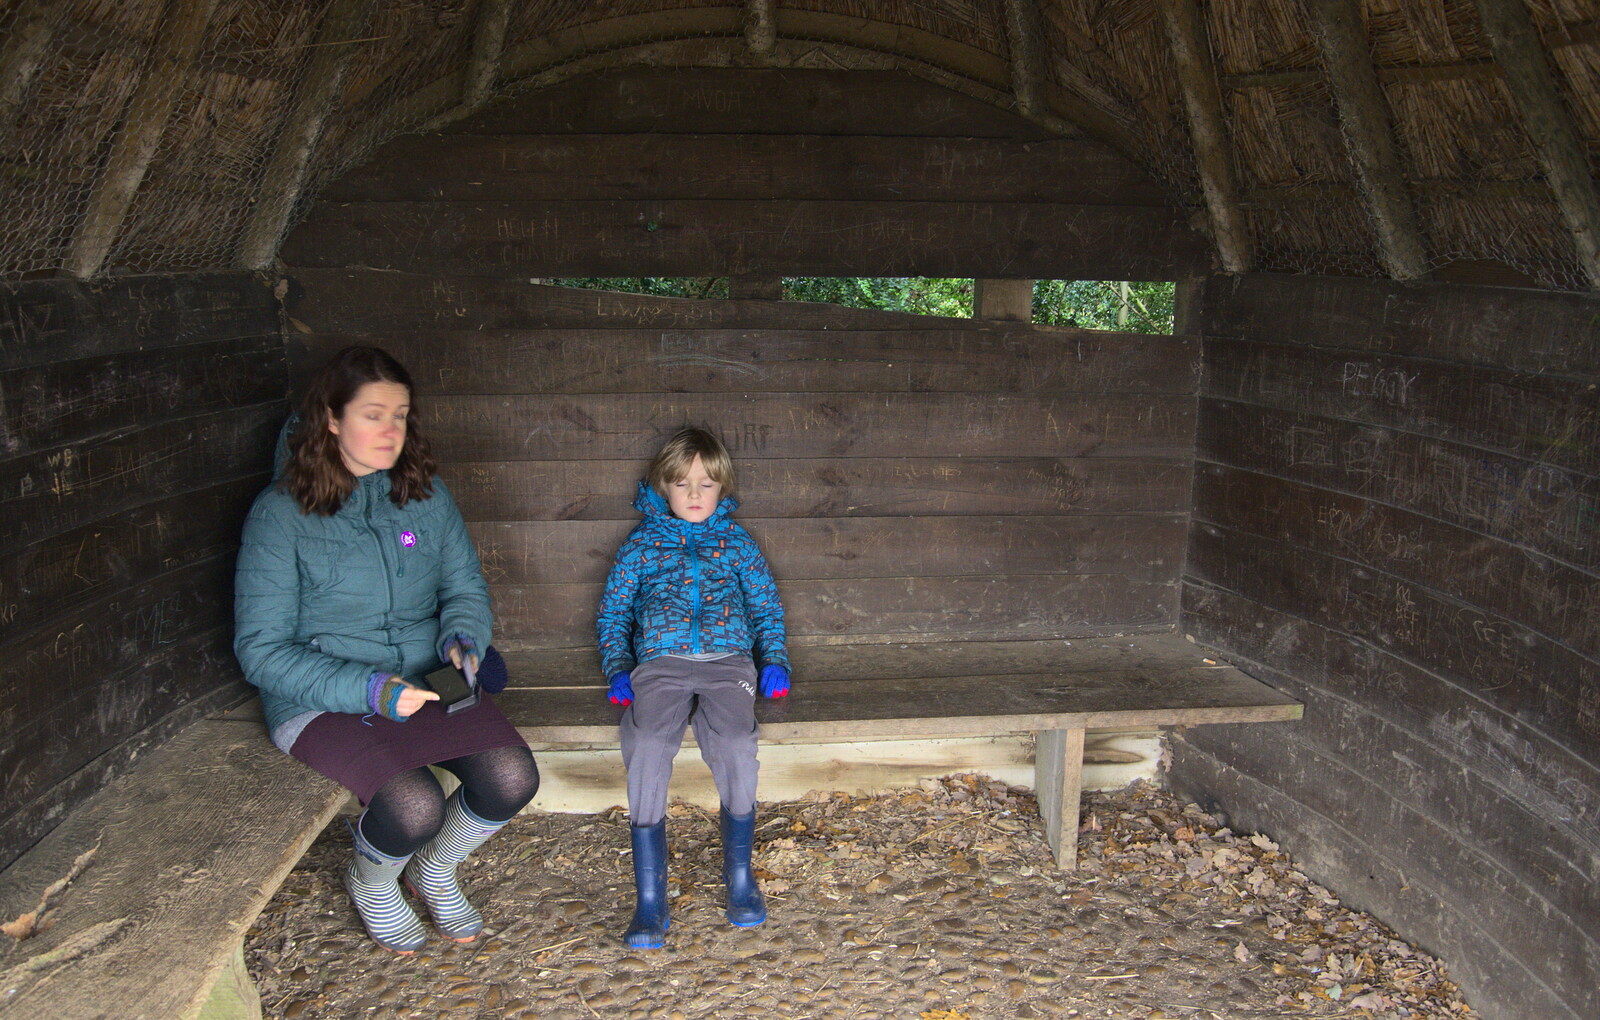 Isobel and Harry in a shelter from Ickworth House, Horringer, Suffolk - 29th December 2018